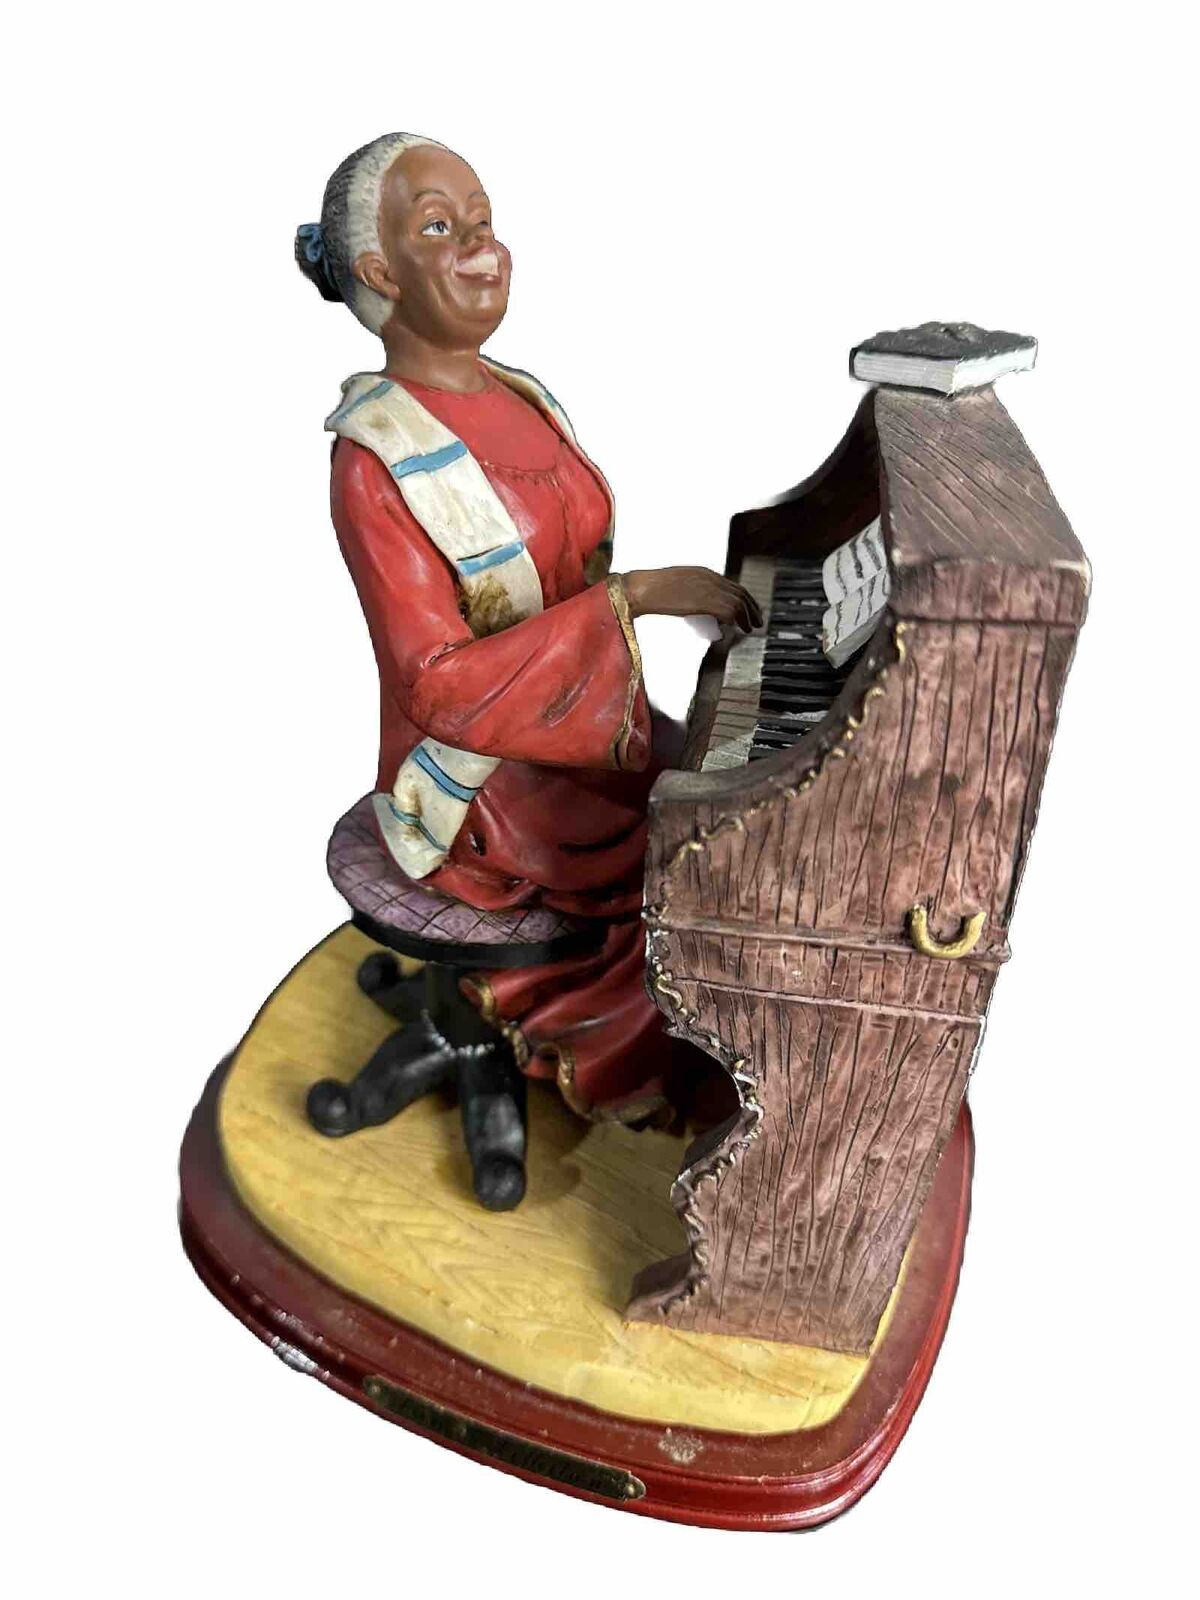 *RARE* Vintage Porcelain Figurine Lady Playing Piano Singing Hymns. Hard To Find